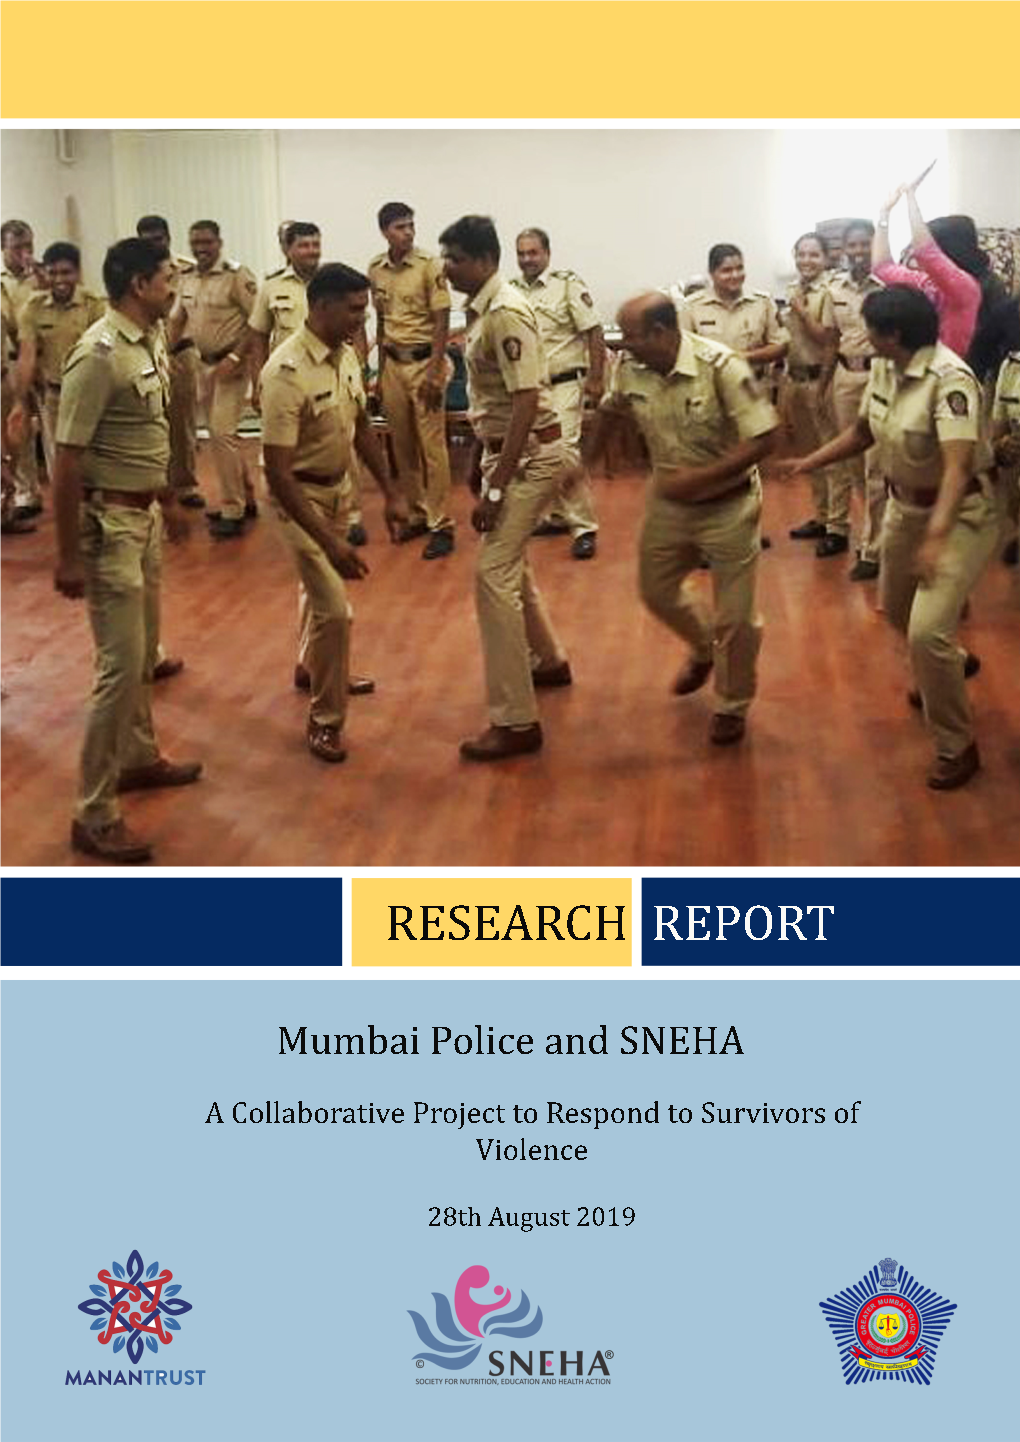 A Collaborative Project with Mumbai Police and SNEHA